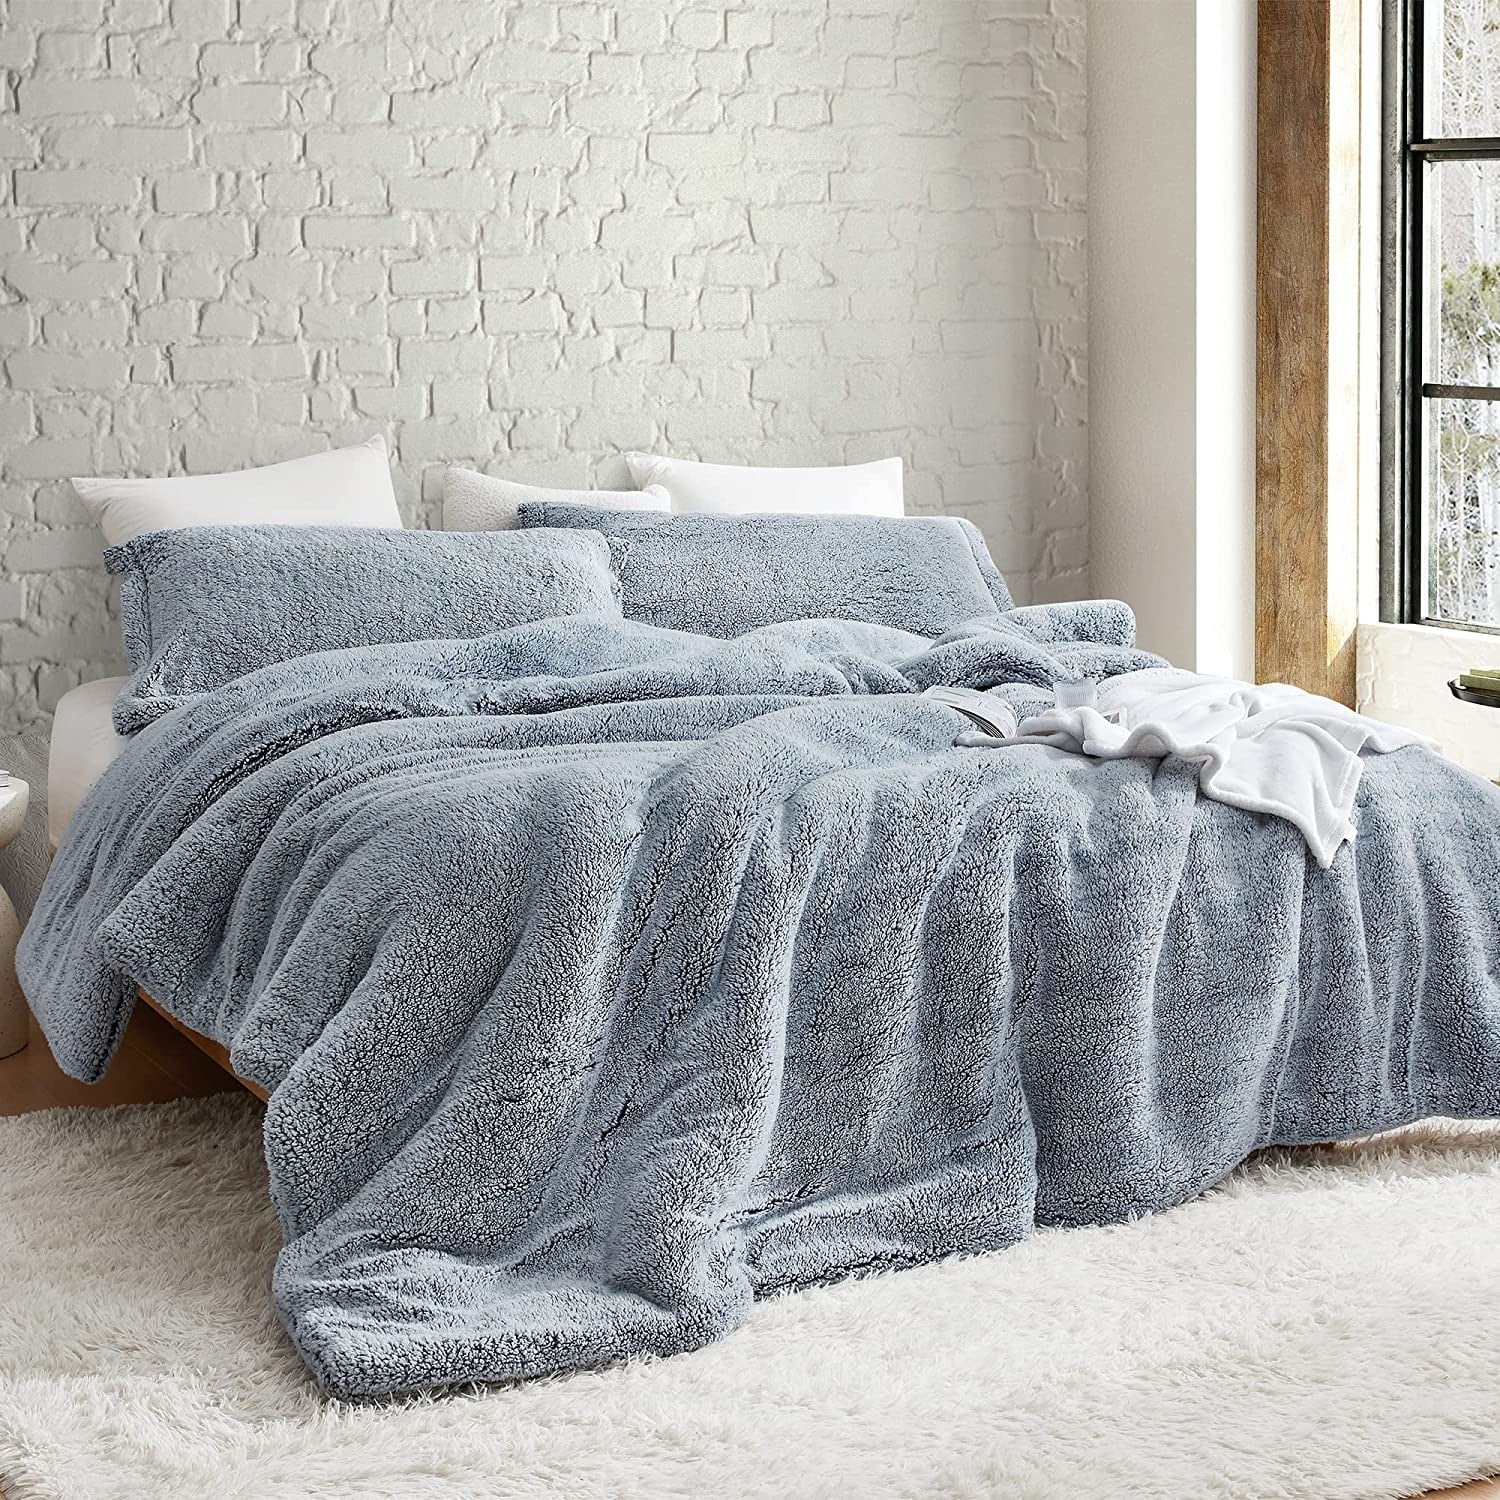 https://ak1.ostkcdn.com/images/products/is/images/direct/a175e7b5da3b2e3ce141743d02d97365383c4223/Coma-Inducer%C2%AE-Oversized-Comforter---Two-Tone-Limited-Release---Whitecap-Navy.jpg